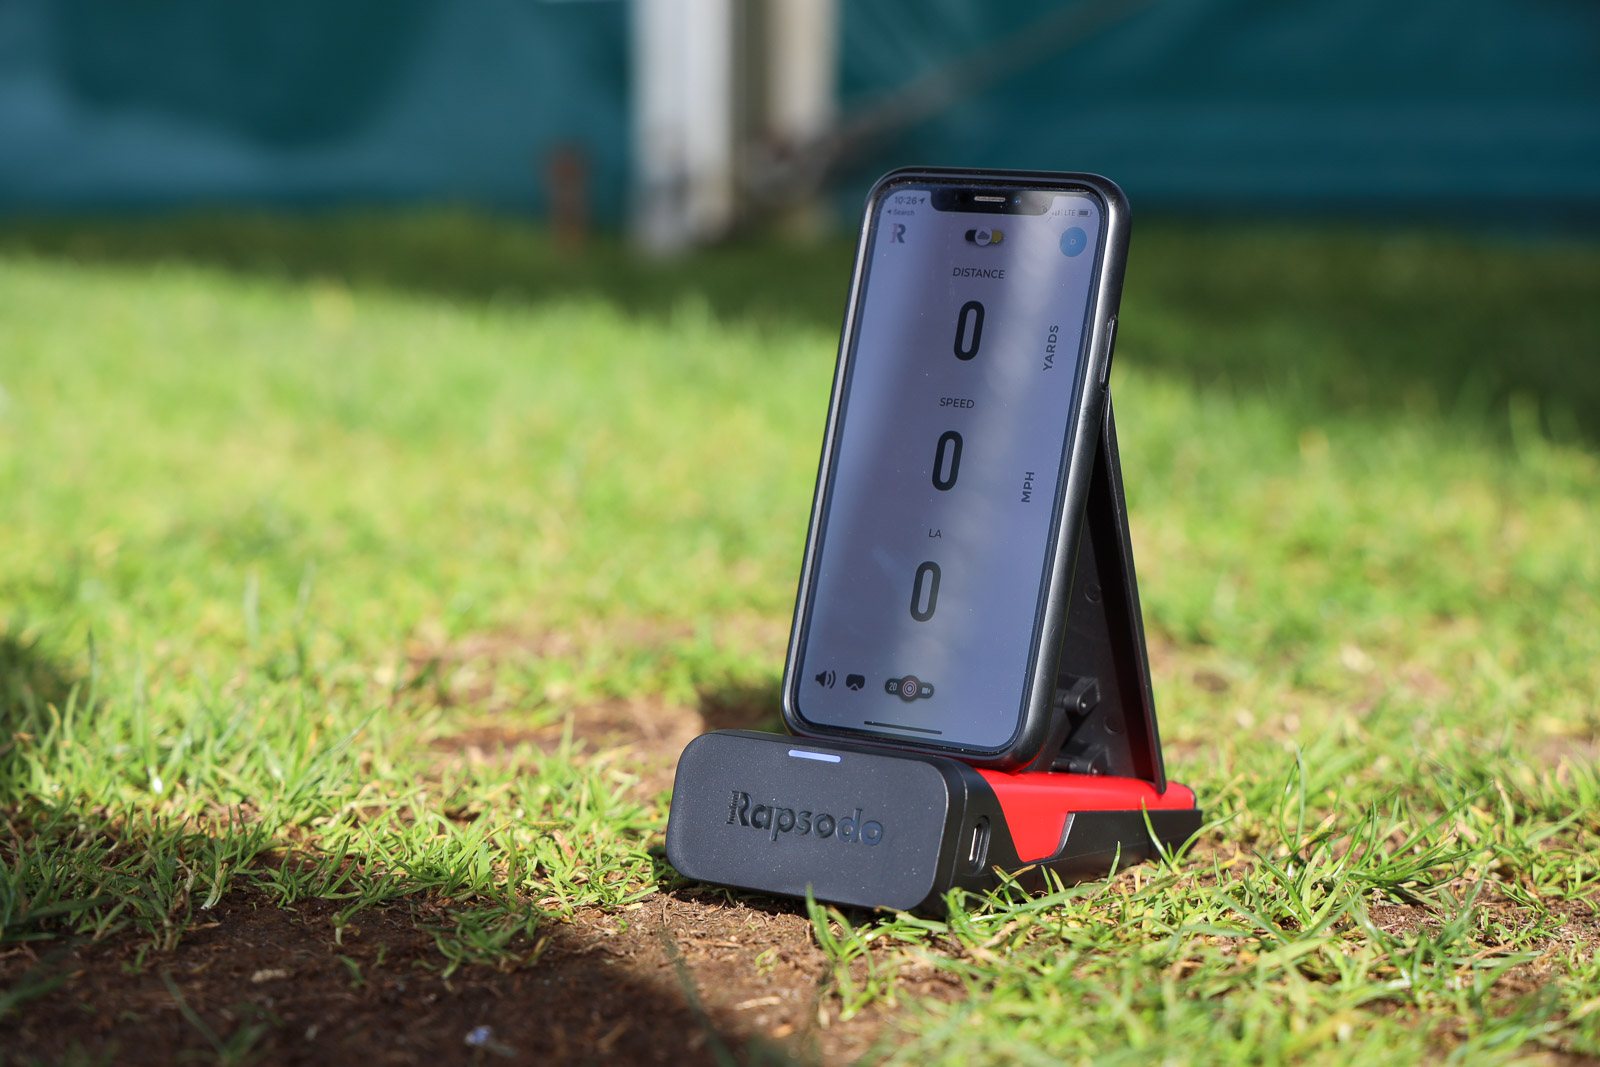 Rapsodo makes one of the best golf launch monitors under $500.